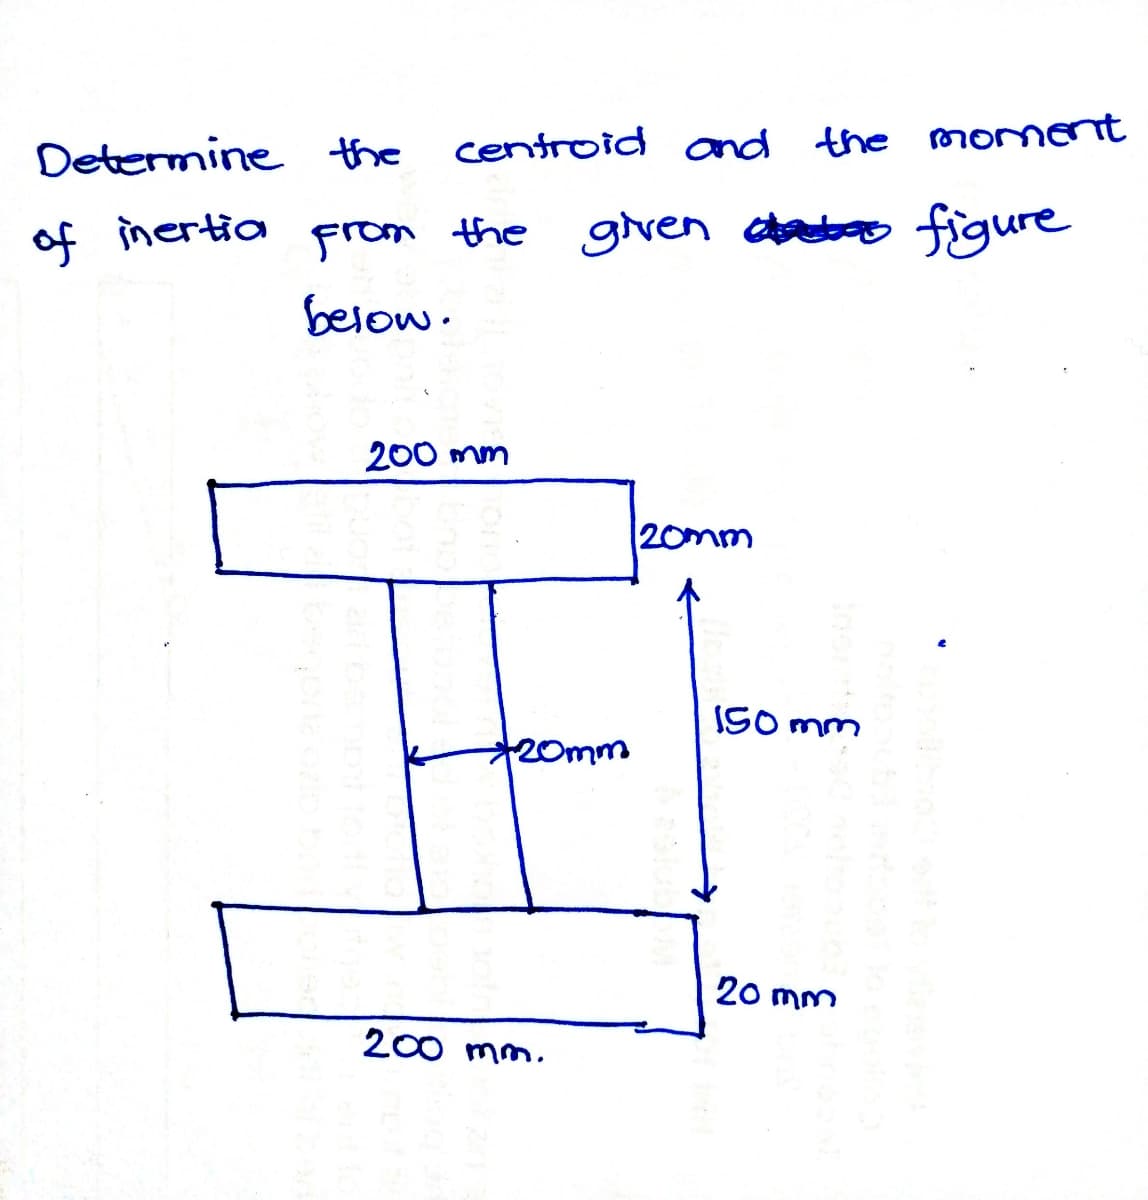 Determine the
centroid and the moment
of inertia
From the gven dbo figure
below.
200 mm
20mm
ISO mm
20mm
20 mm
200 mm.
